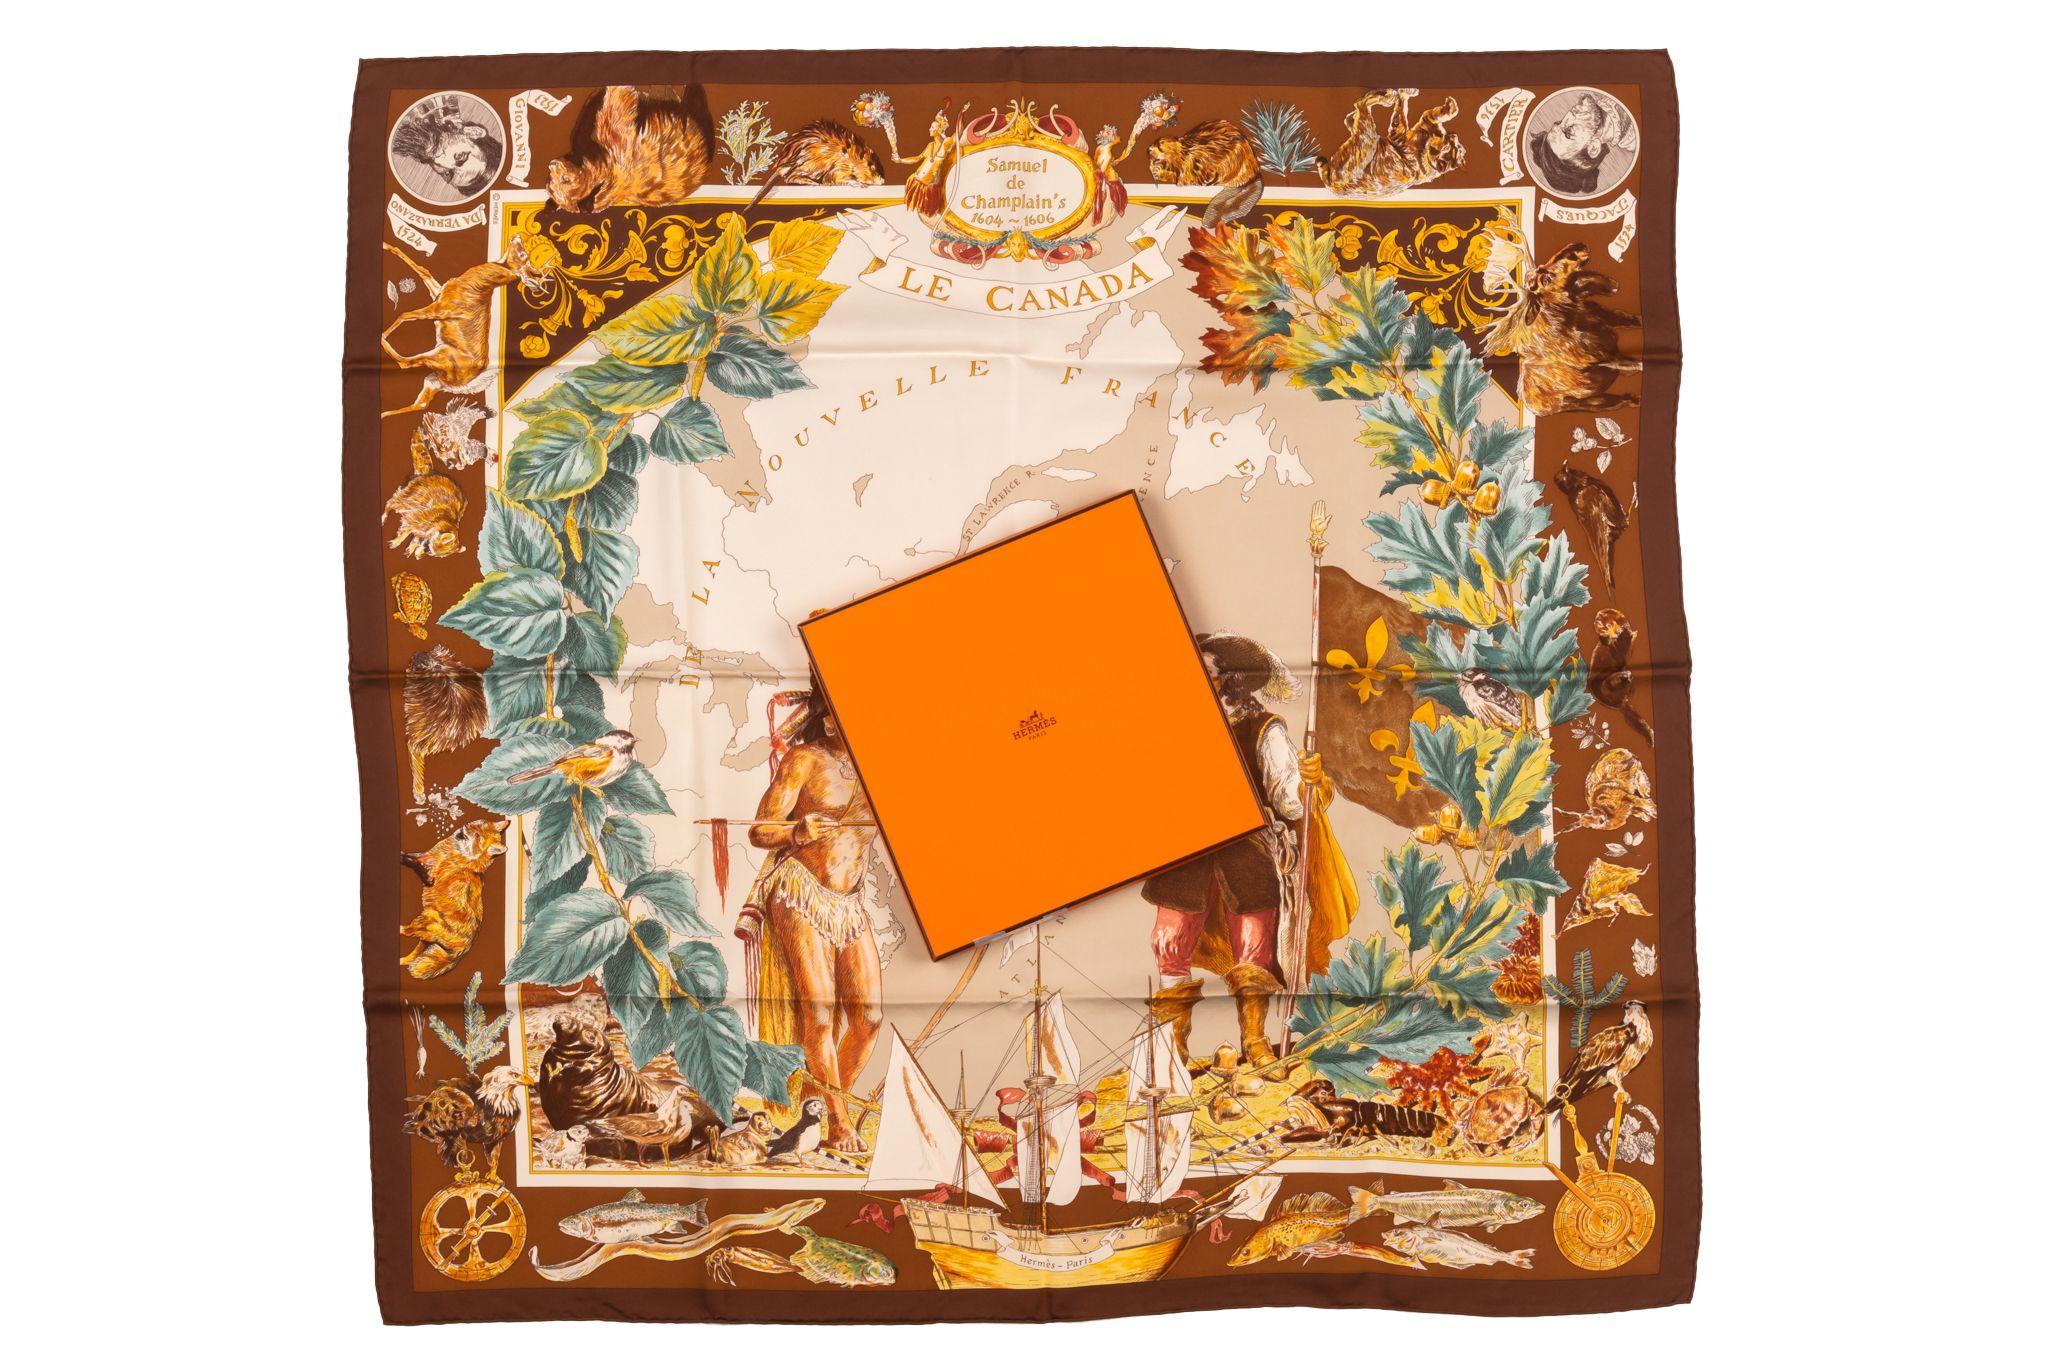 Hermès brown silk Le Canada scarf designed by Kermit Oliver. Hand-rolled edges. Highly collectible and rare. Pre-owned with box.